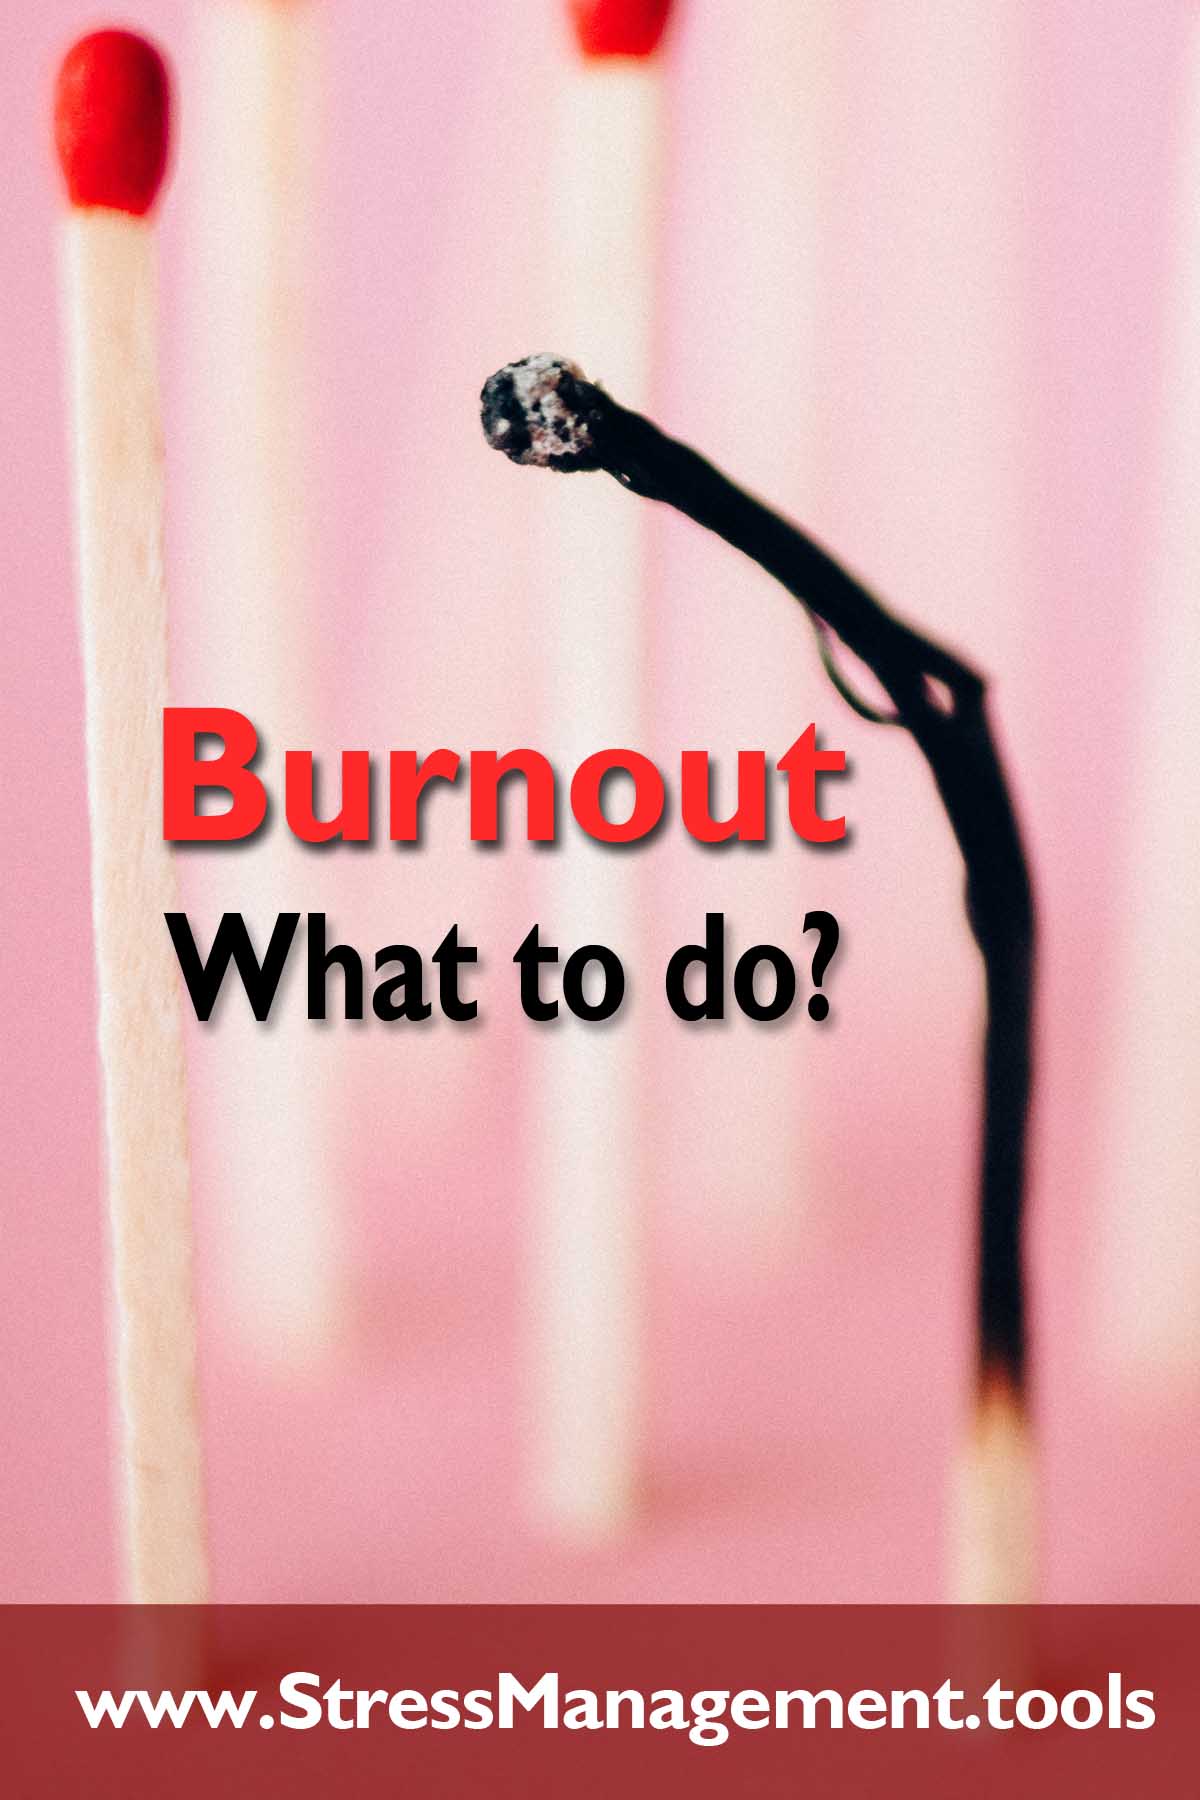 Burnout - What to do?